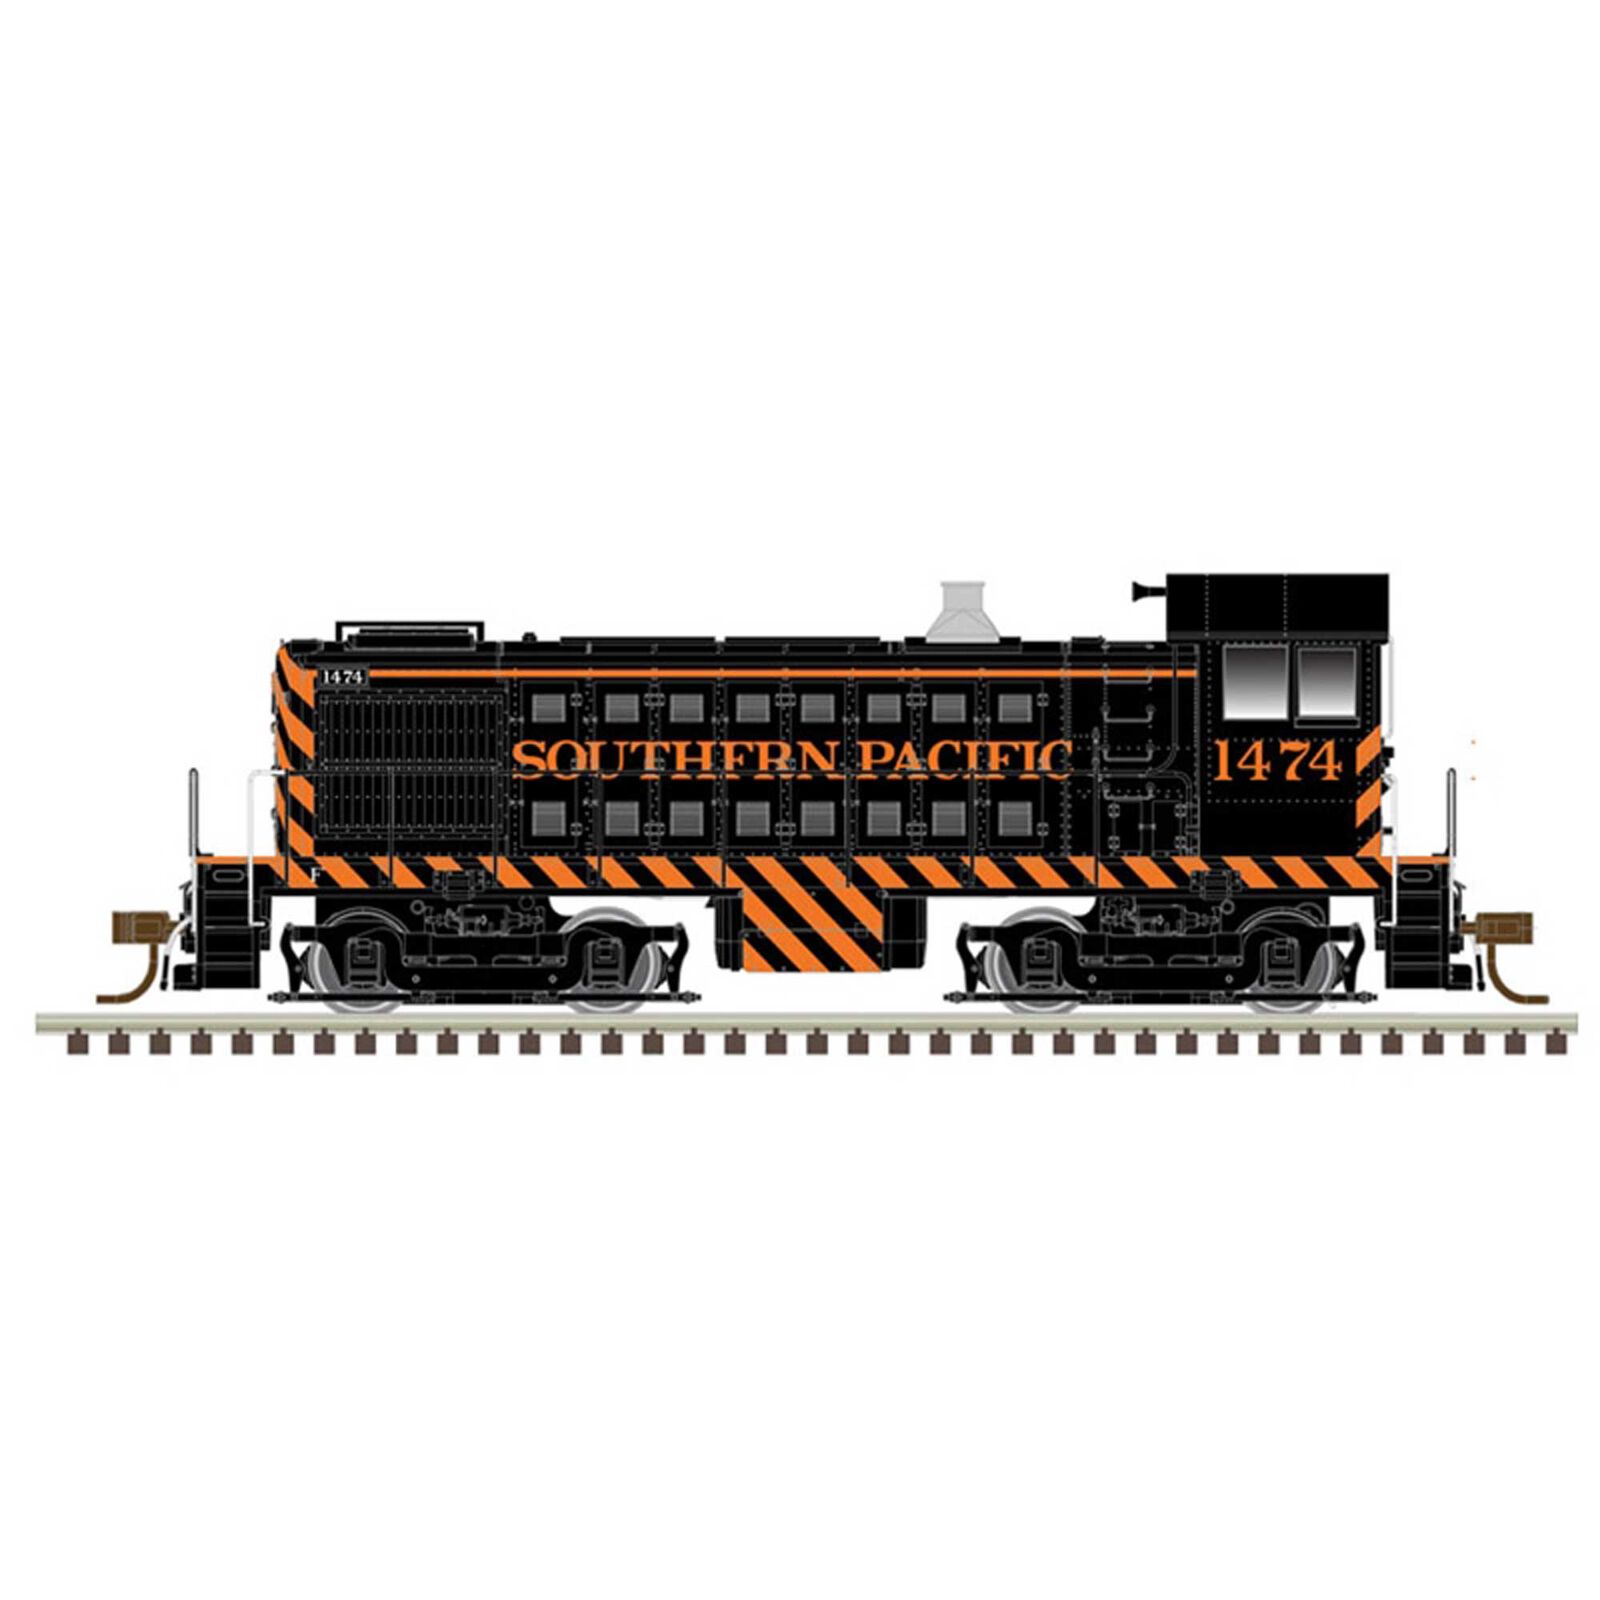 HO S-4 LocoSouthern Pacific 1474